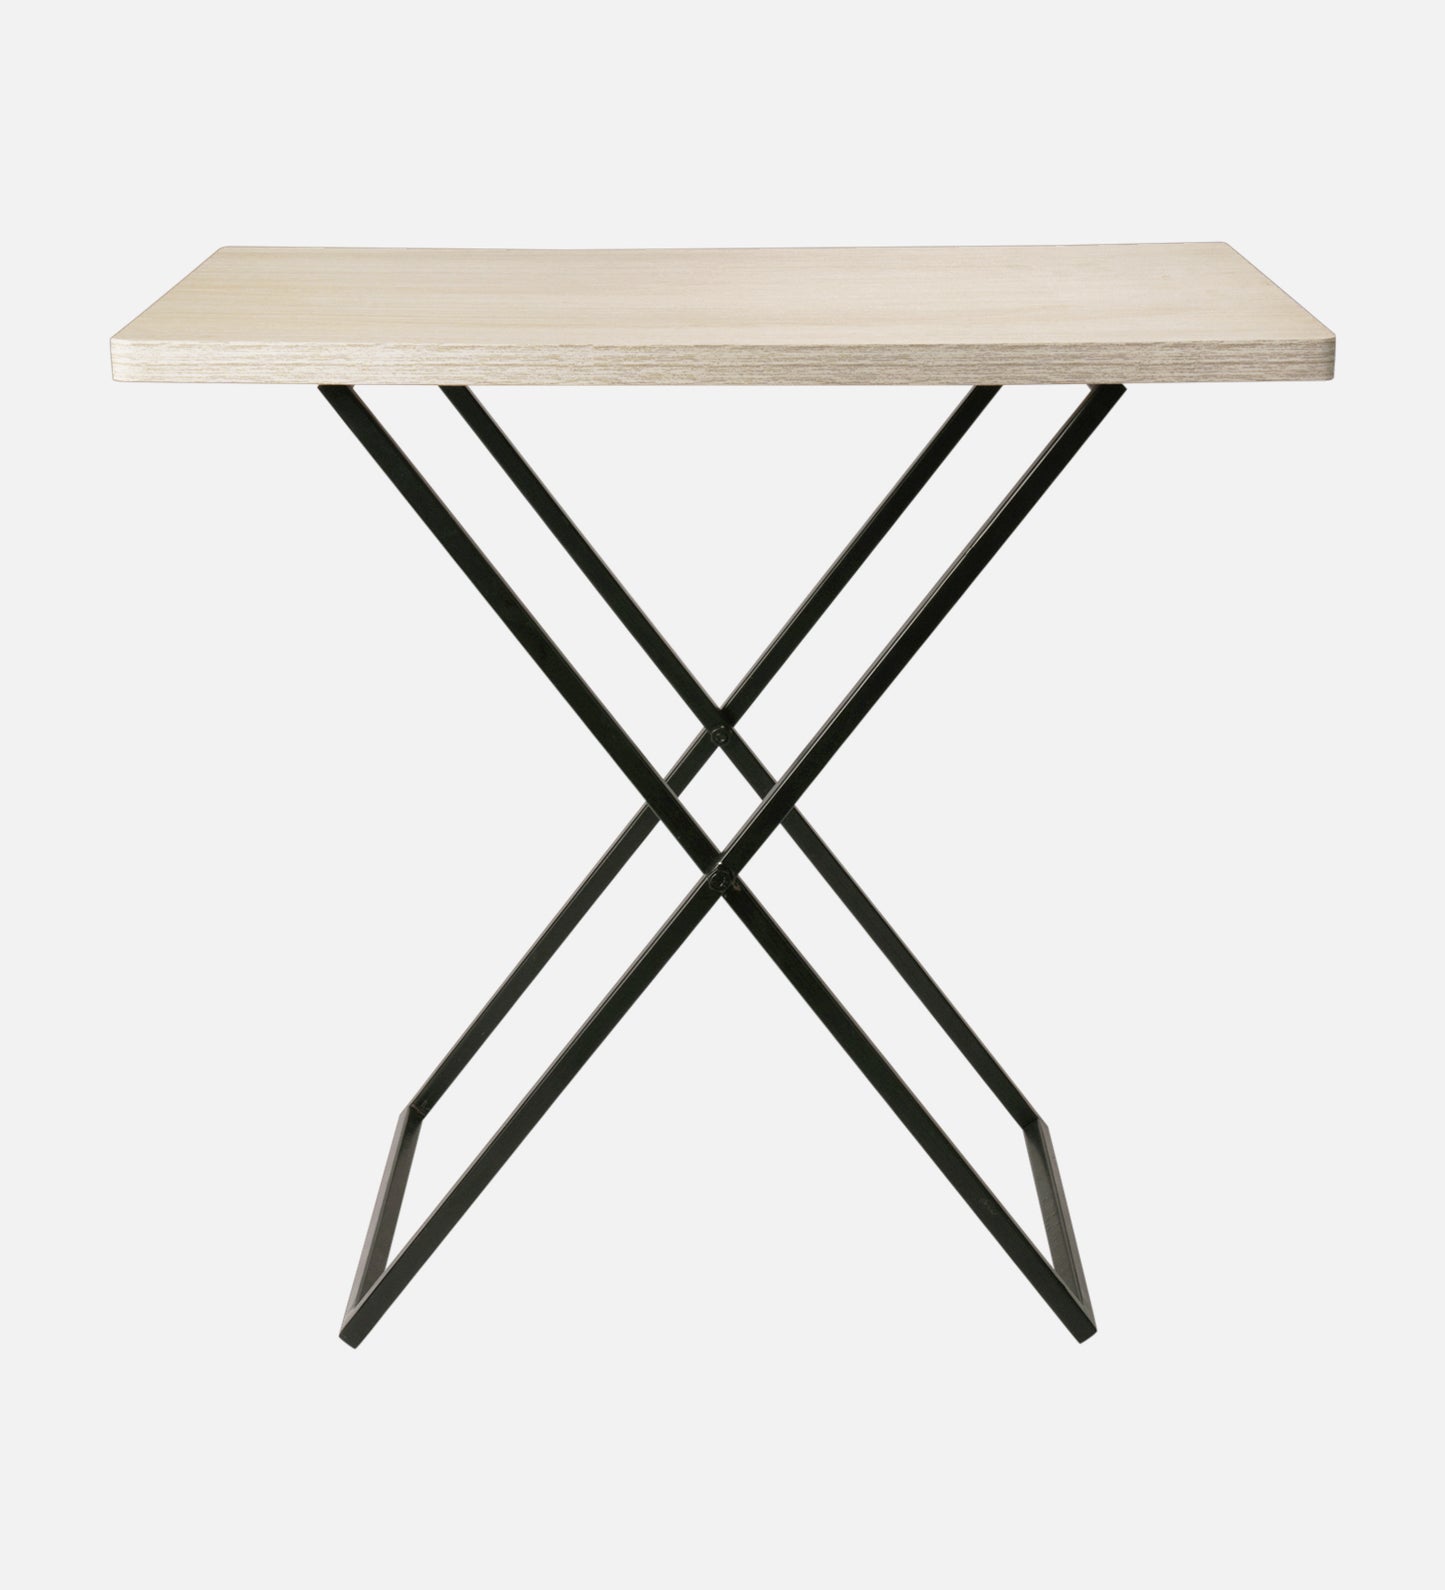 Pine Hues Criss Cross Side Tables, Writing Tables, Wooden Tables, Kids Tables, End Tables Living Room Decor by A Tiny Mistake